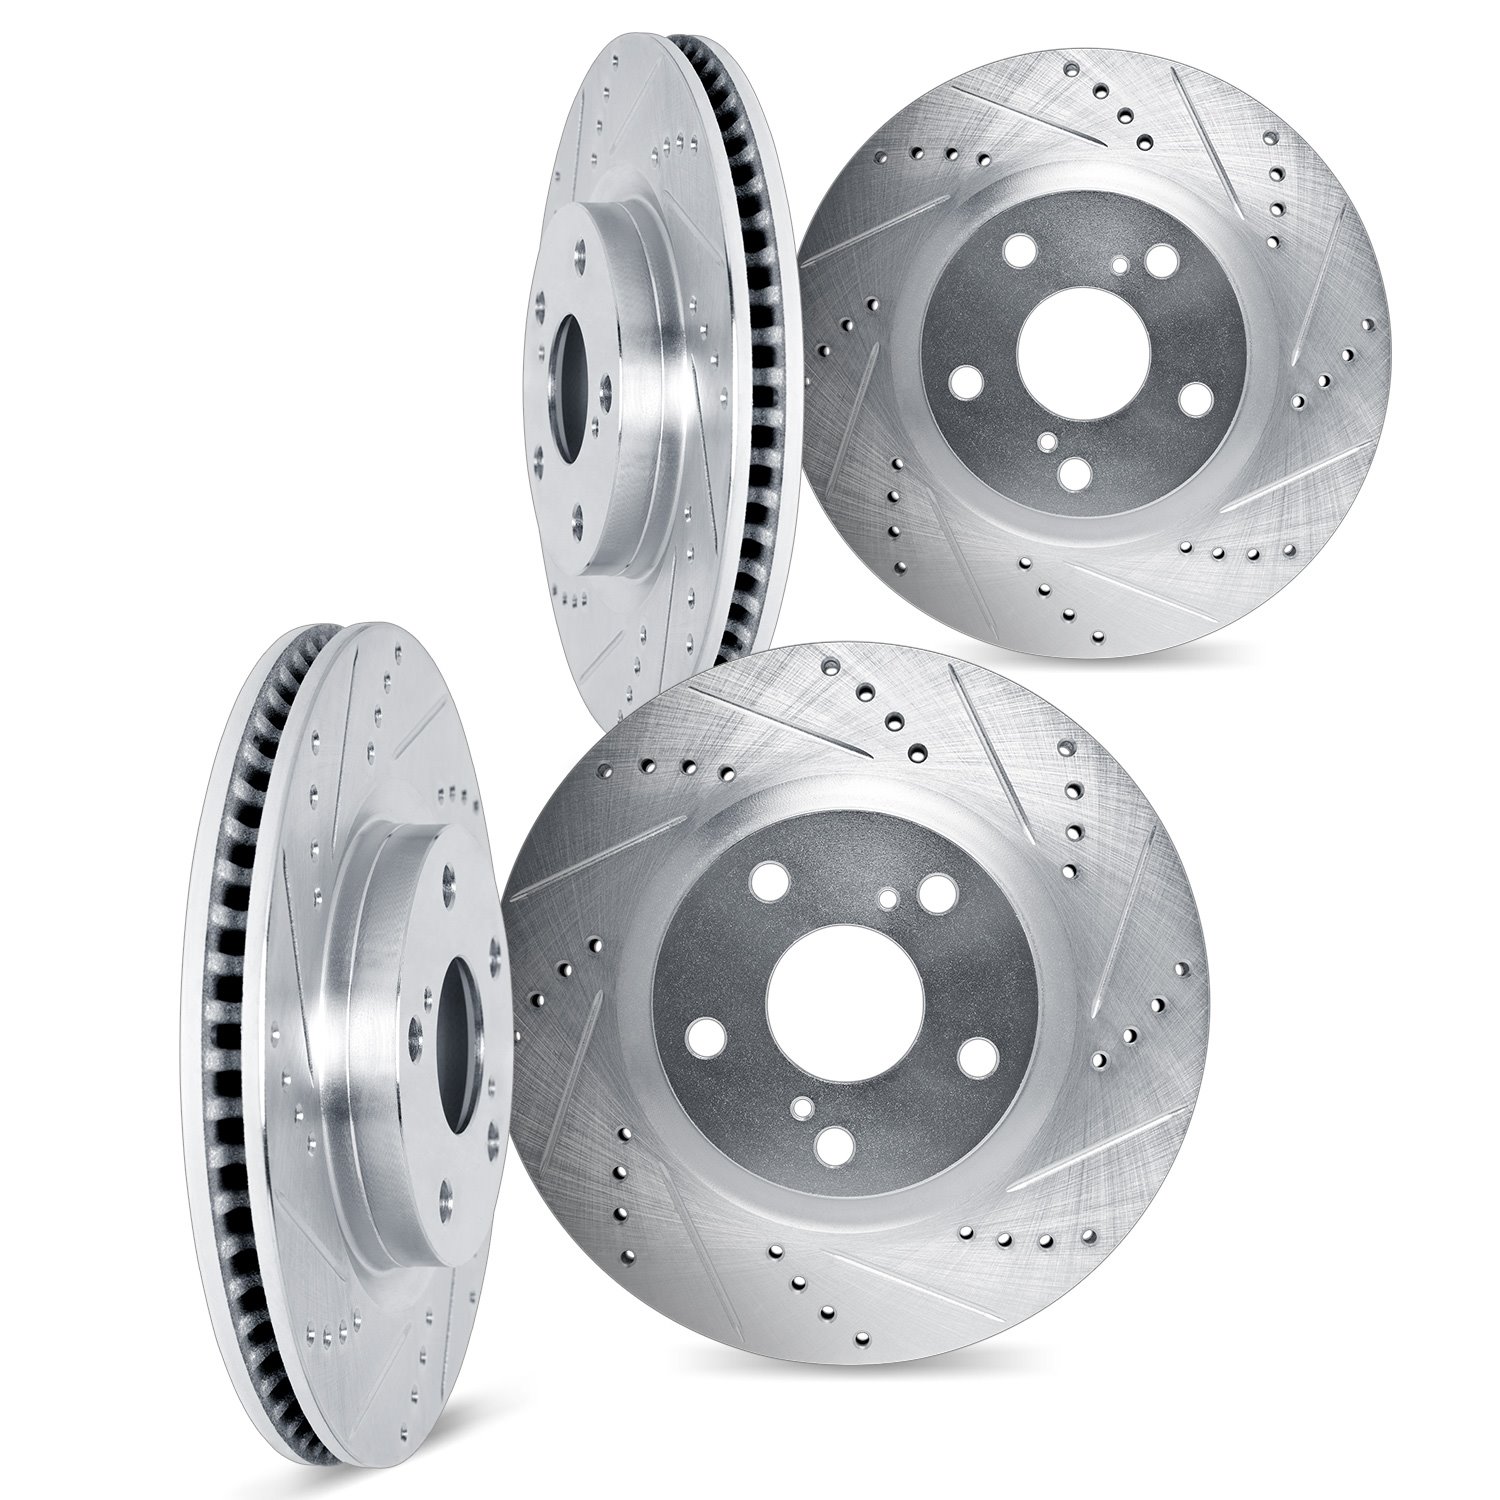 7004-68001 Drilled/Slotted Brake Rotors [Silver], 2003-2008 Infiniti/Nissan, Position: Front and Rear